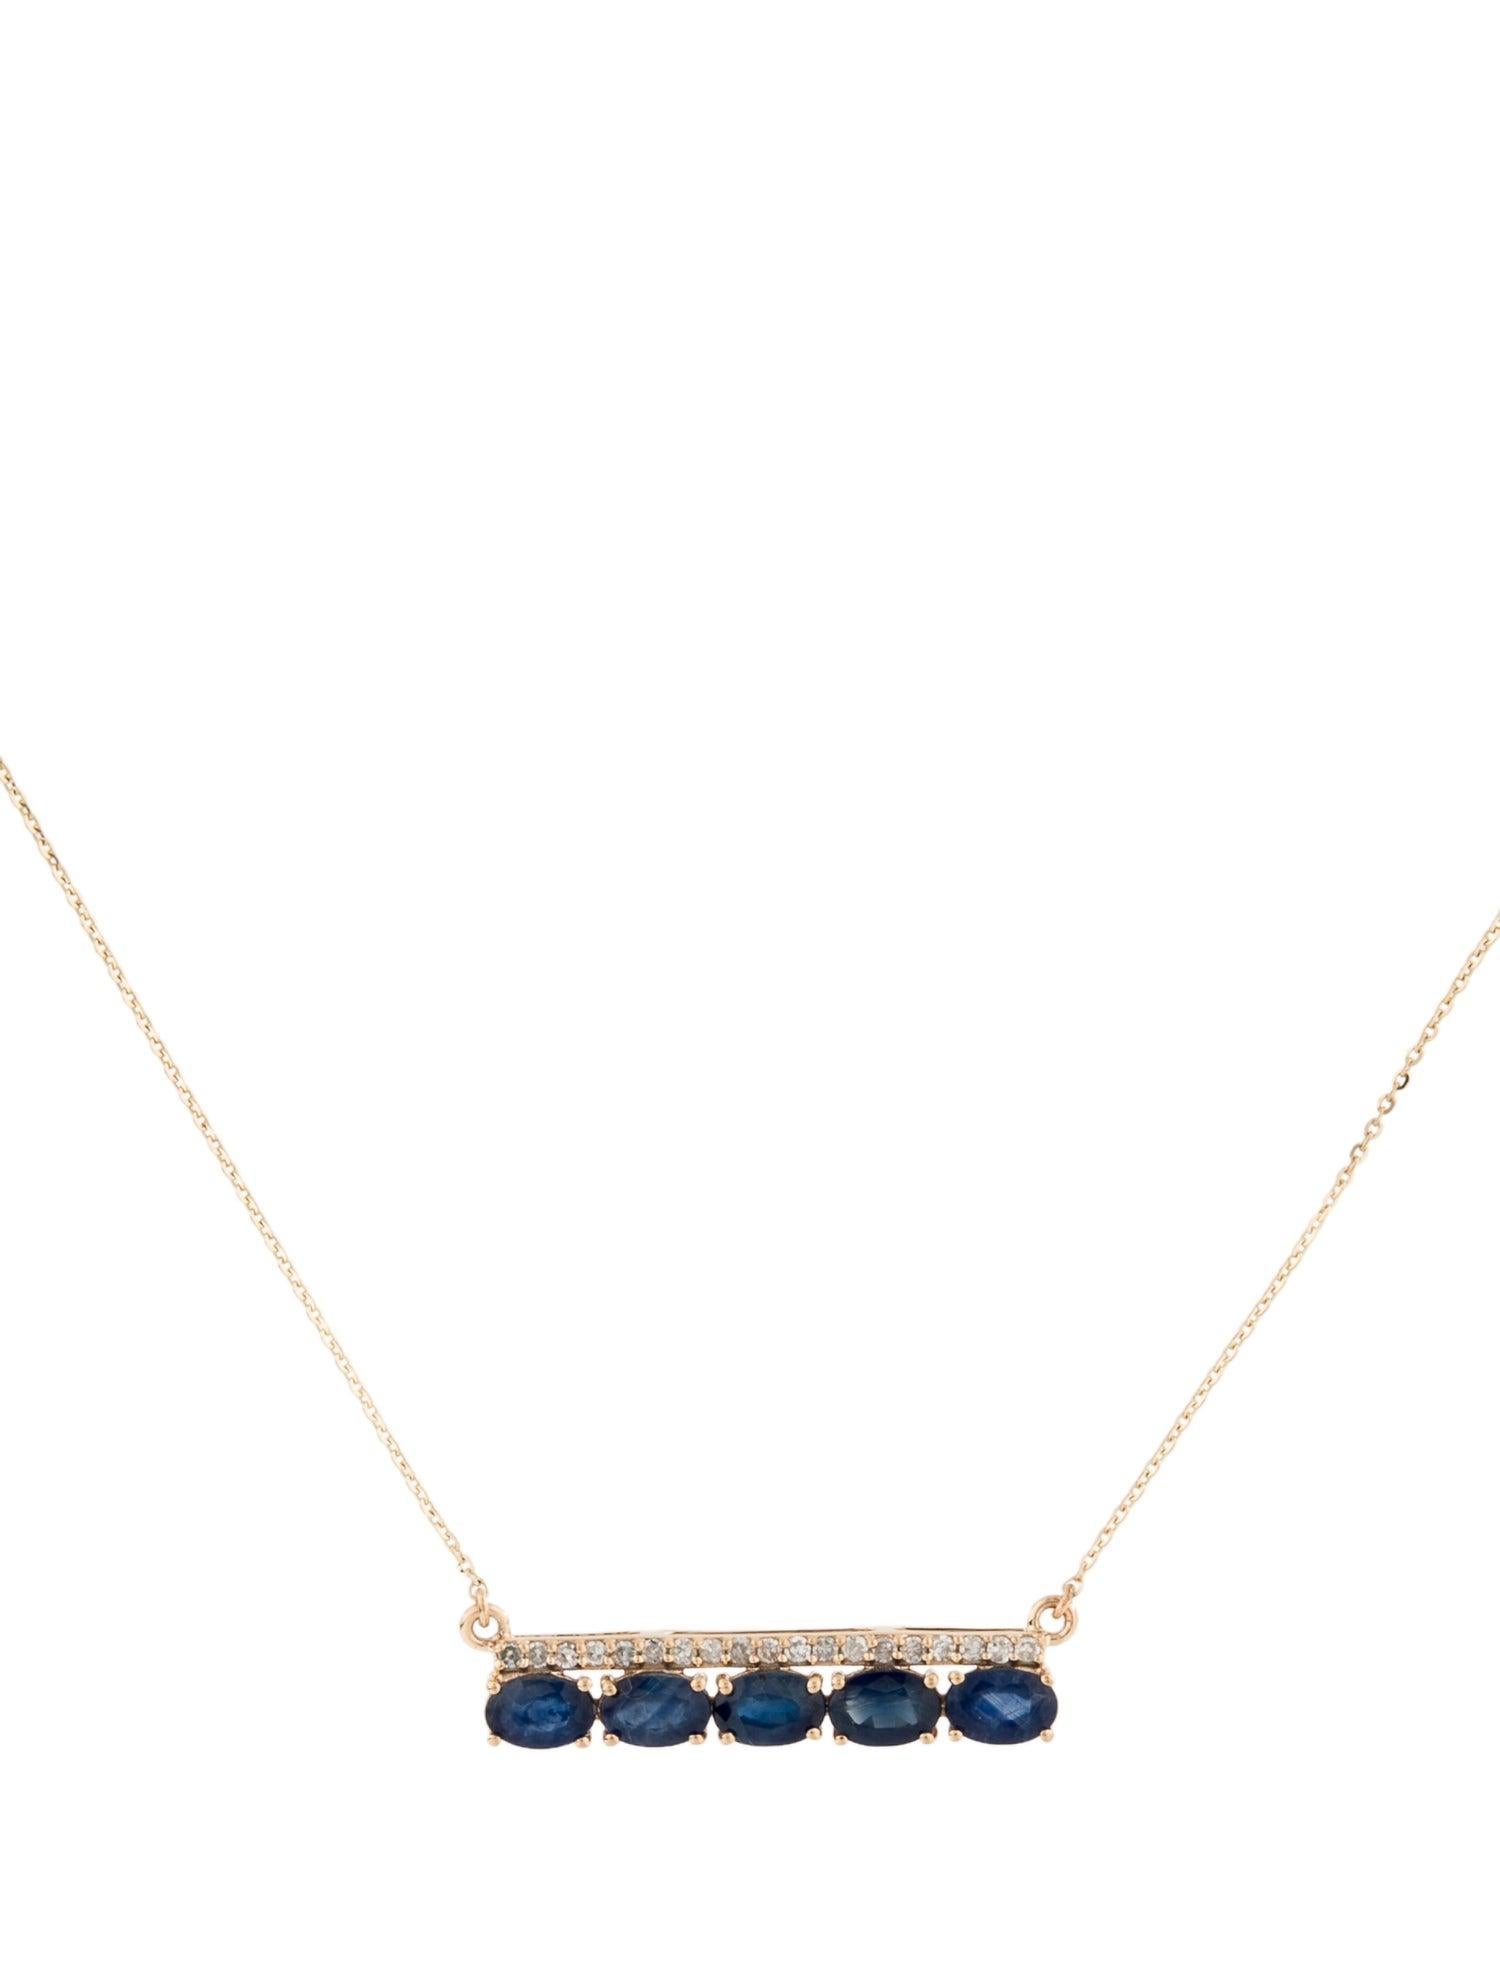 Sapphire & Diamond Bar Pendant Necklace, 14K Gold - Elegant Statement Jewelry In New Condition For Sale In Holtsville, NY